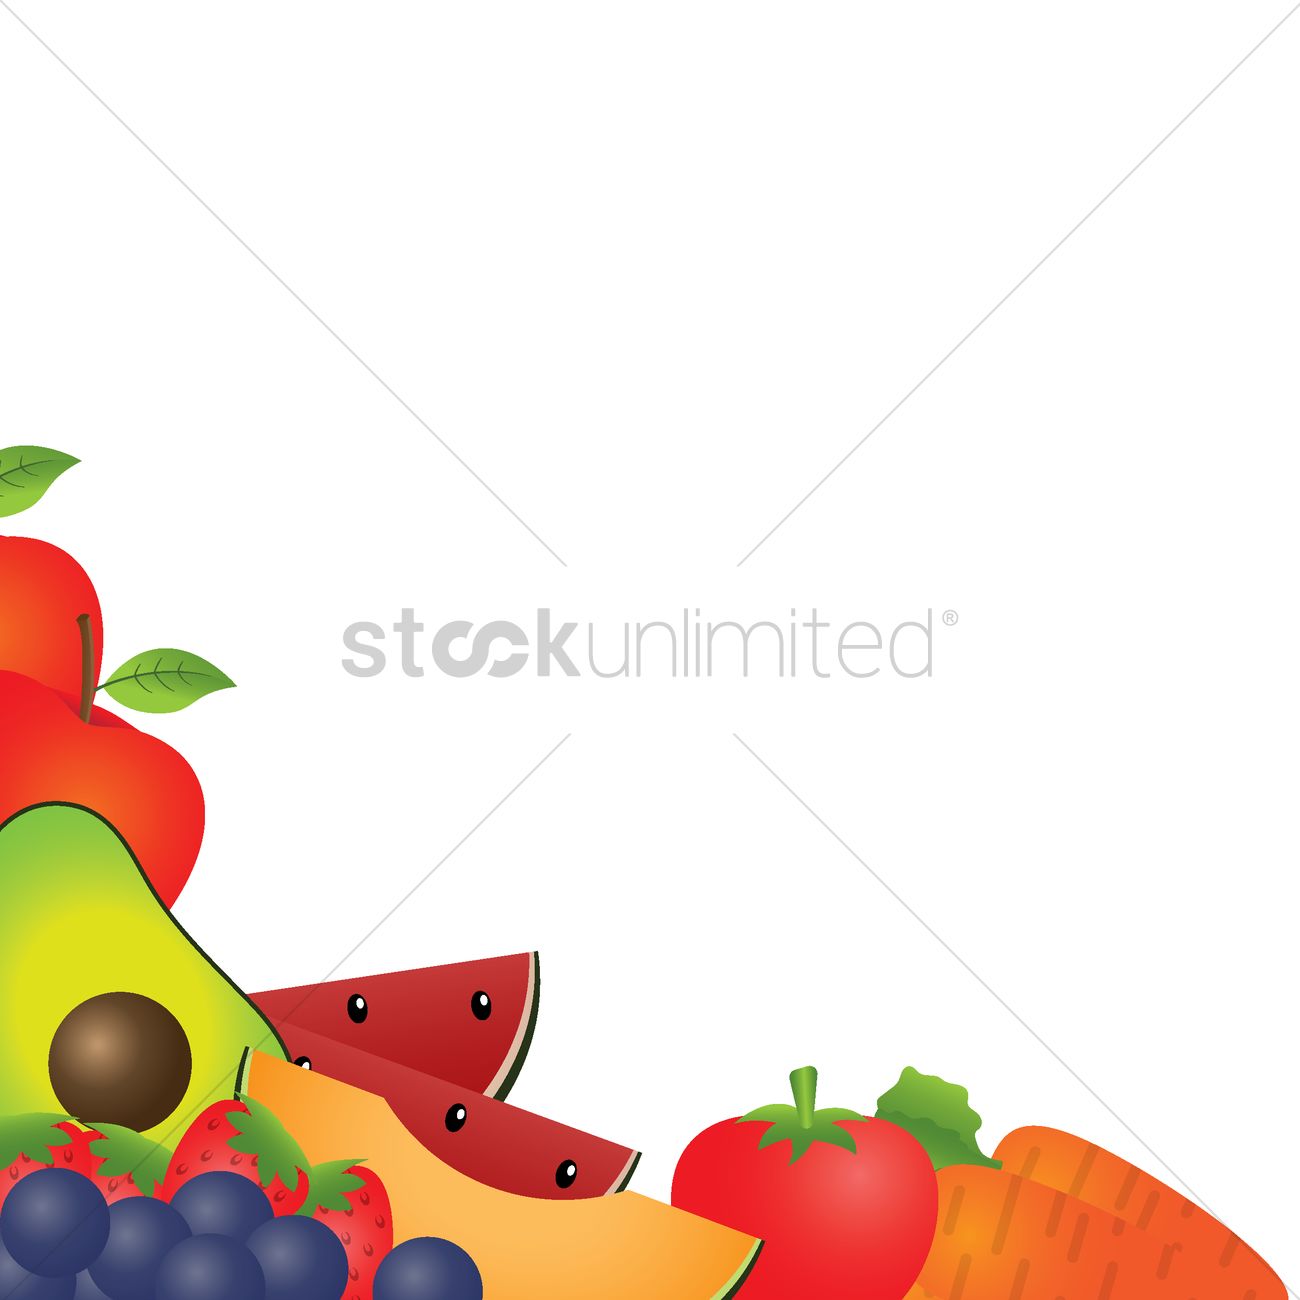 Fruits and vegetable background design Vector Image